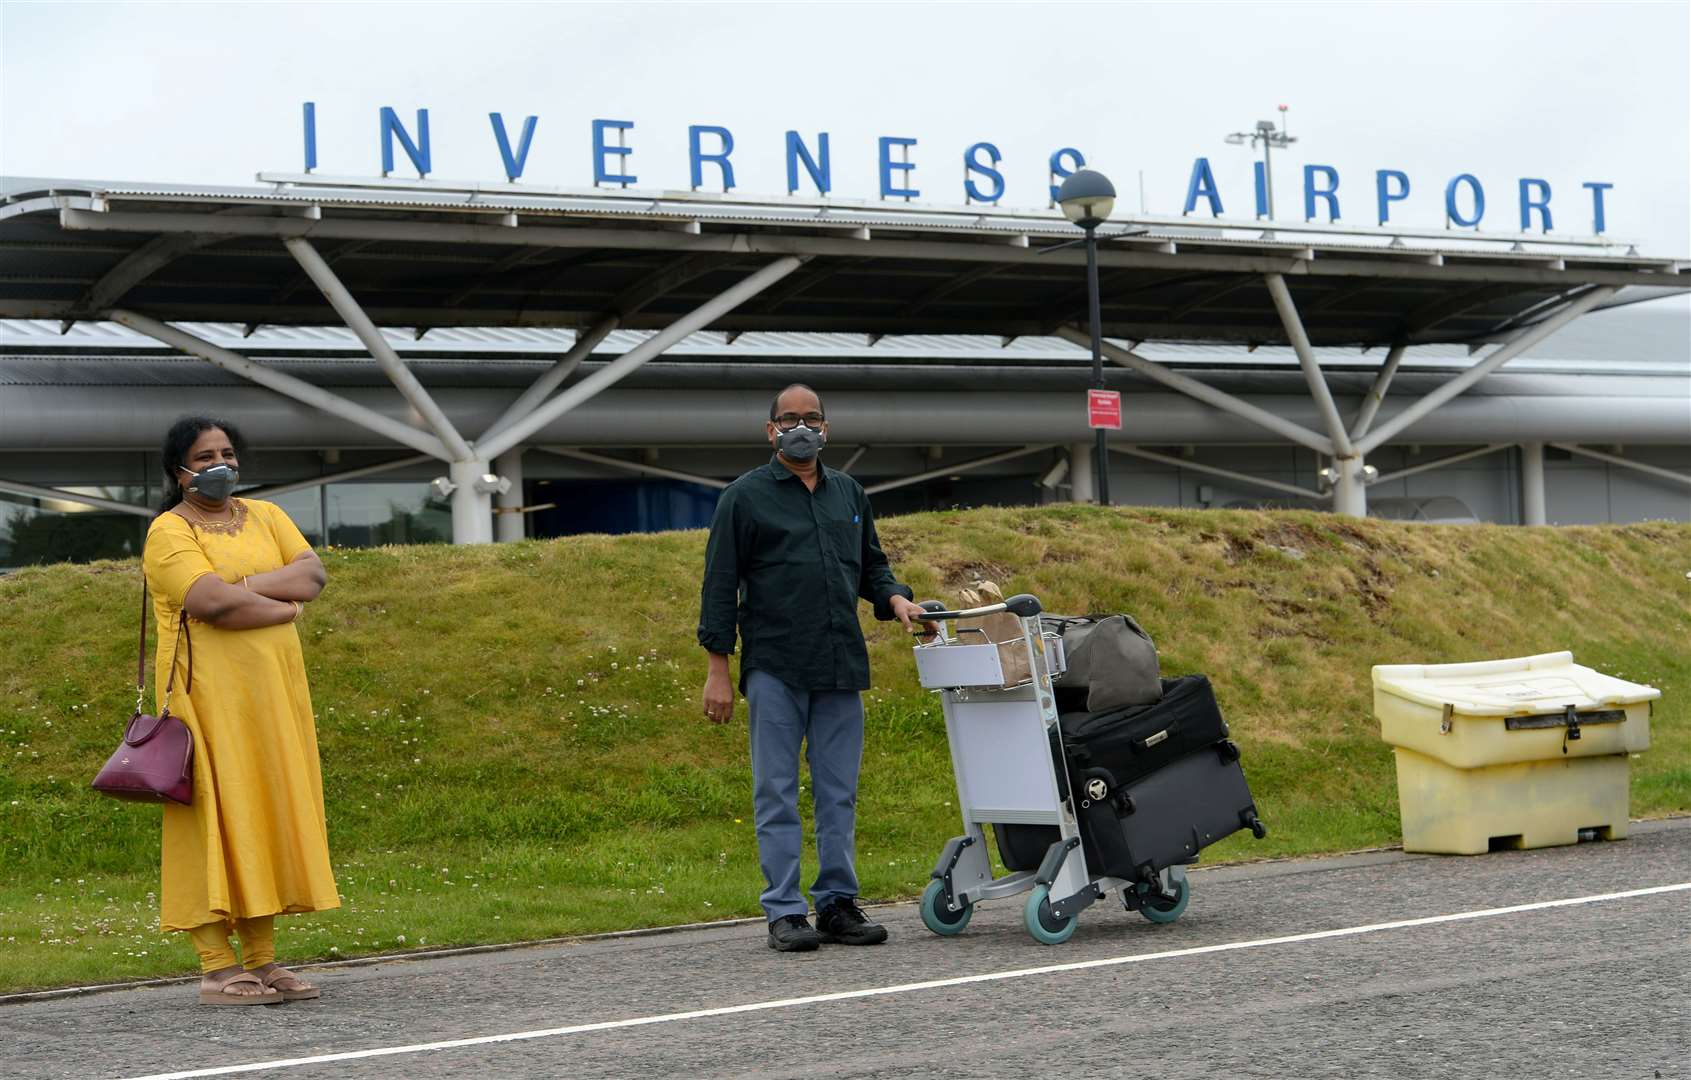 Passengers at Inverness Airport.